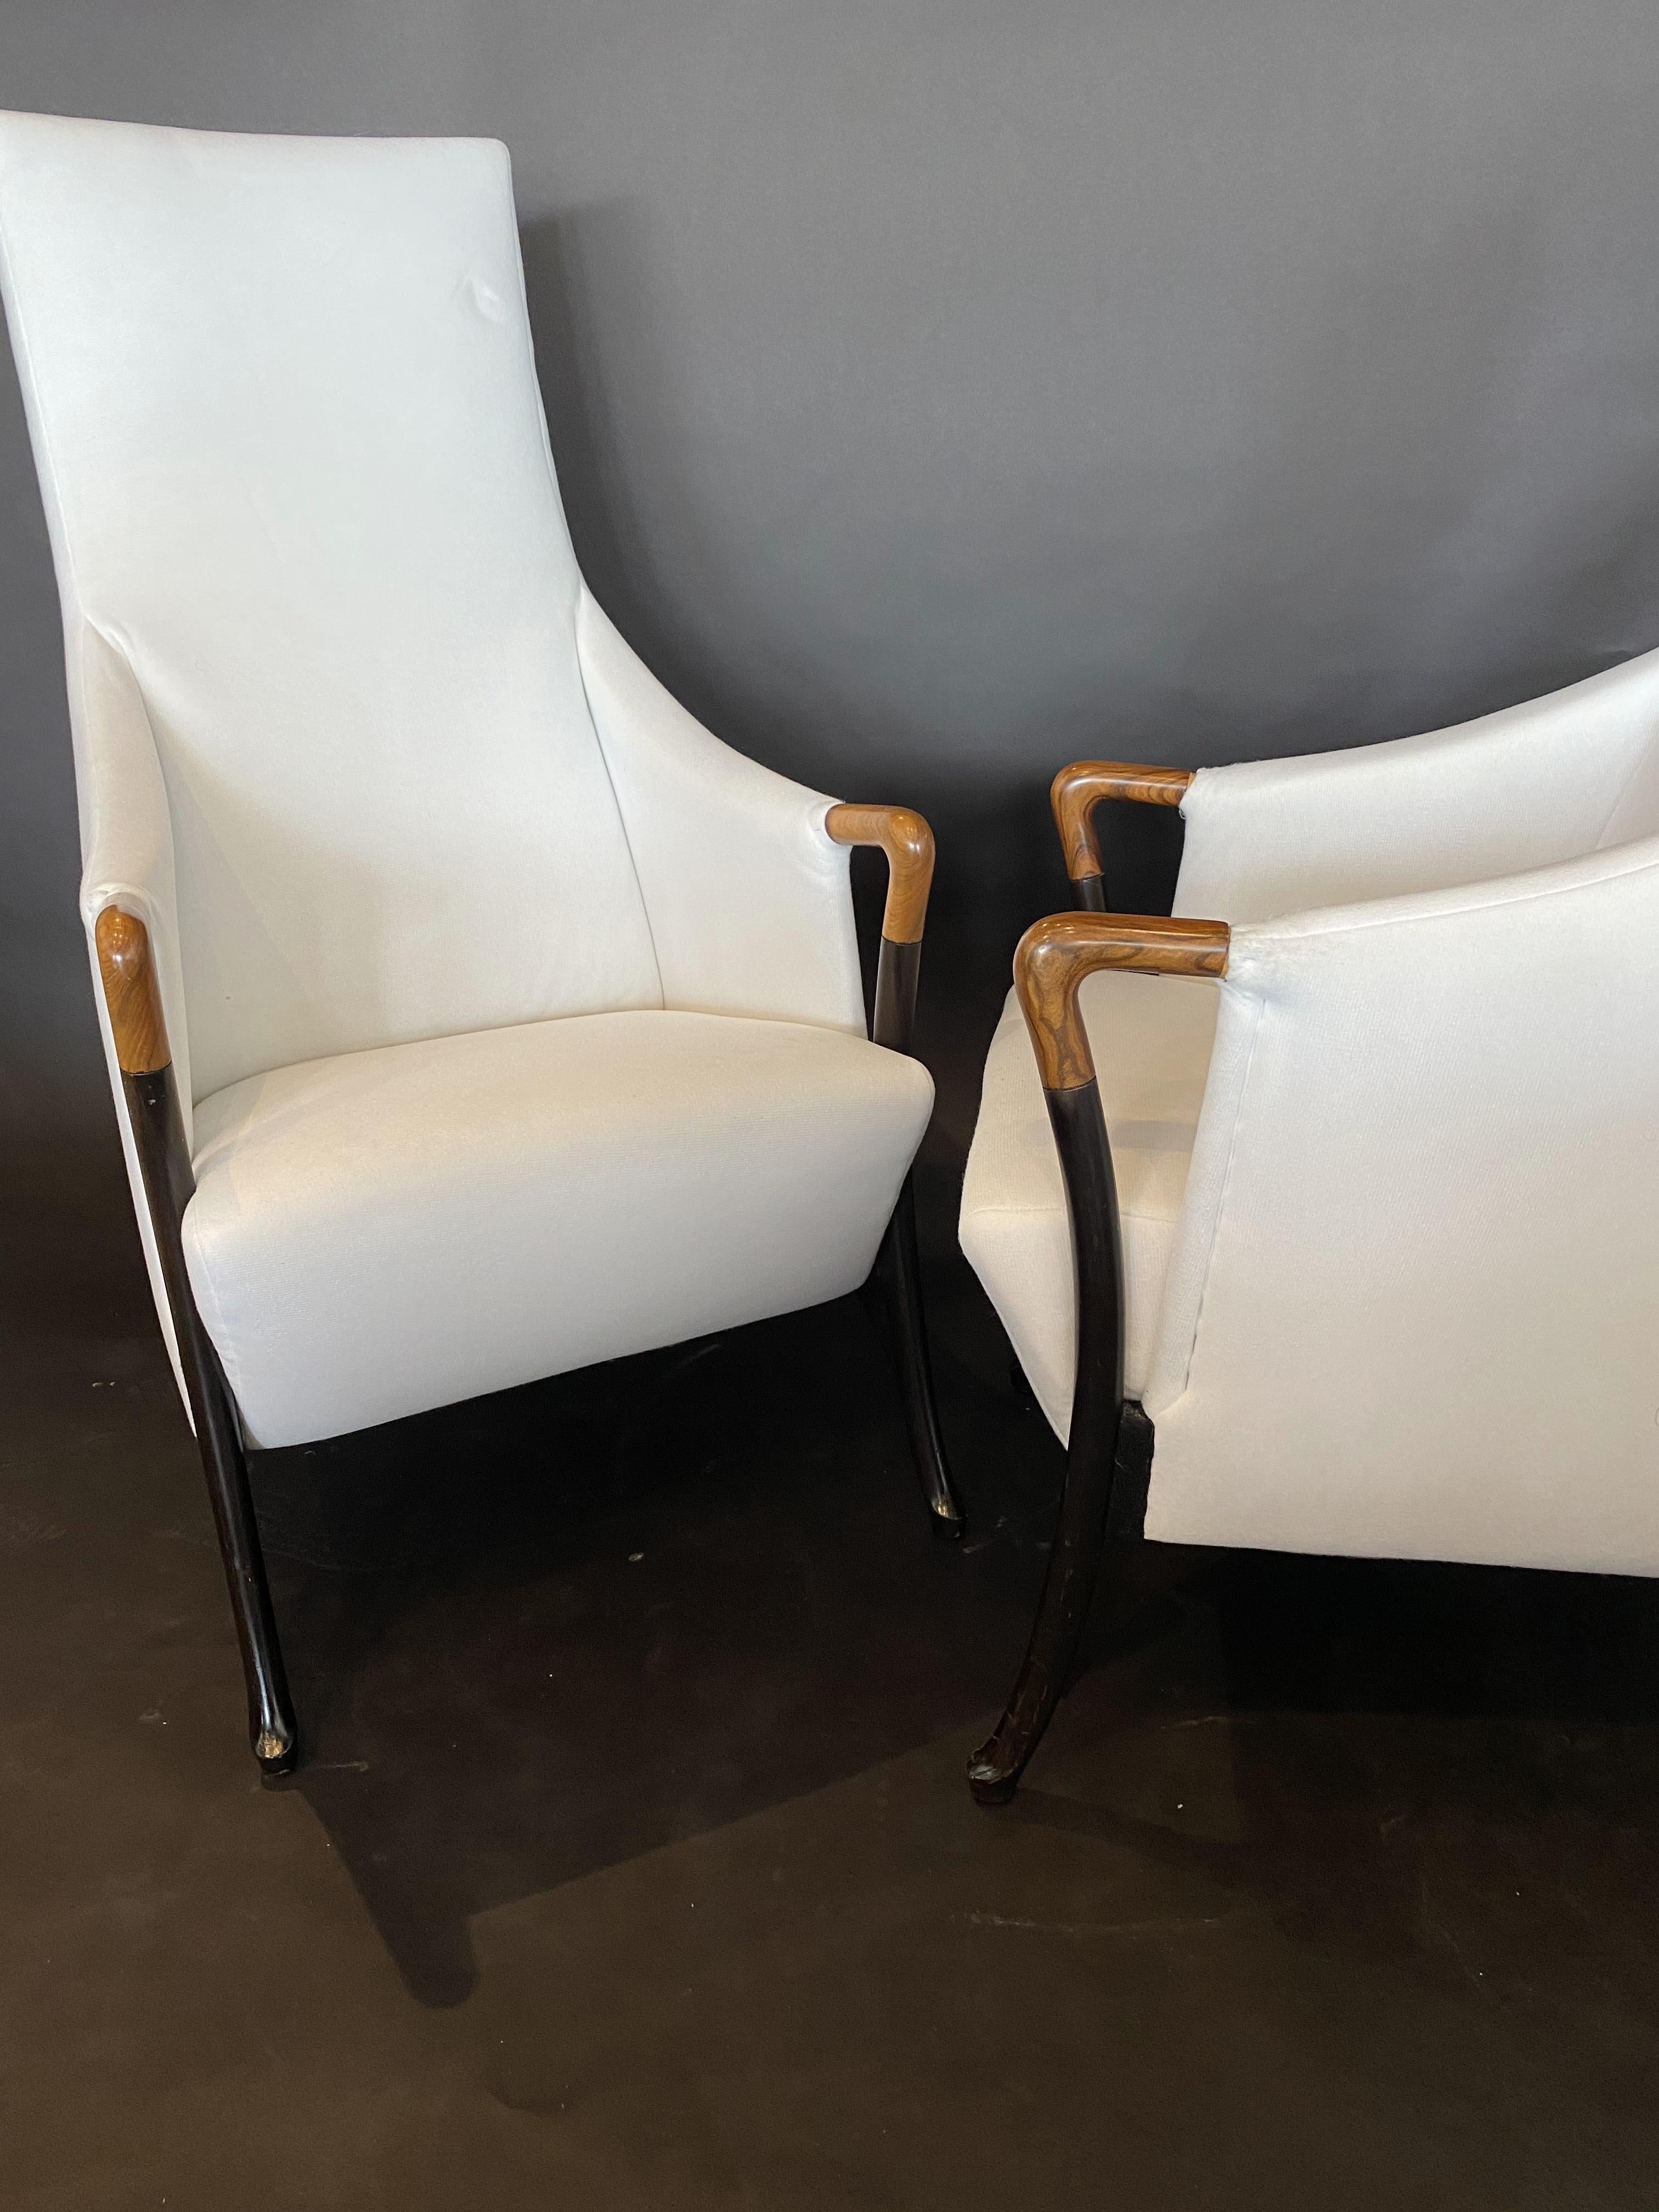 The high upholstered back and seat, with sweeping walnut arms and handrests, over splayed ebonized legs.
Umberto Asagno started working for Giorgetti in 1968, and became head designer and led their research center for design. He is currently